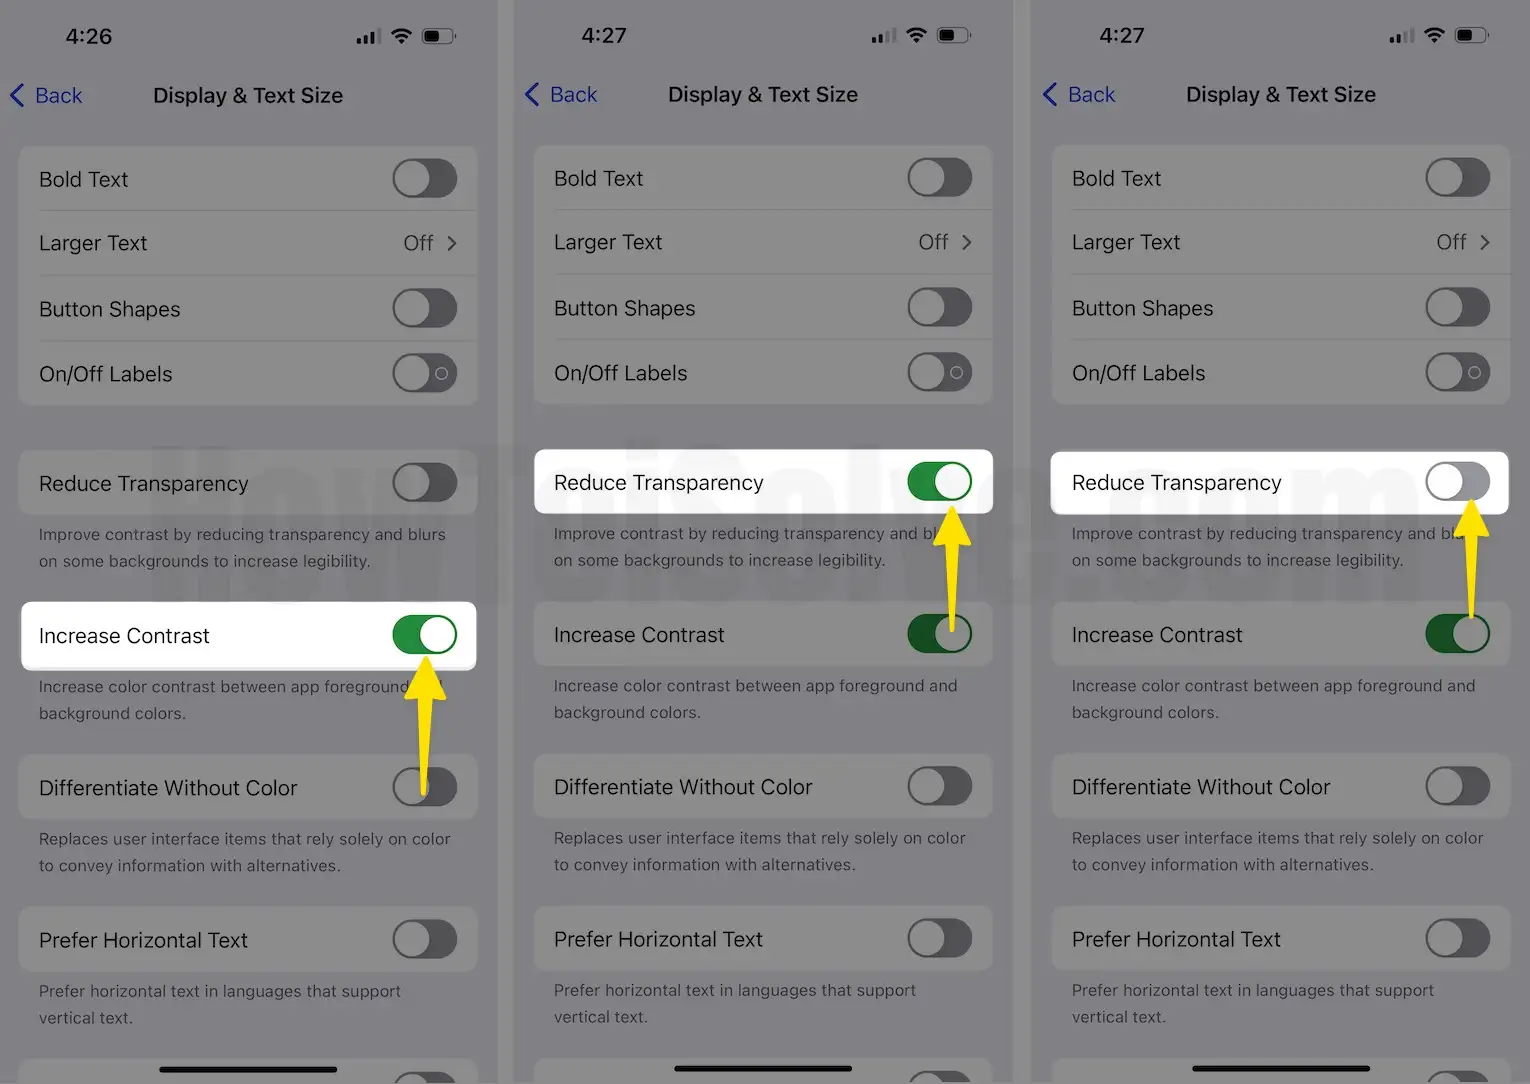 Enable increase contrast and toggle OFF reduce transparency on iphone